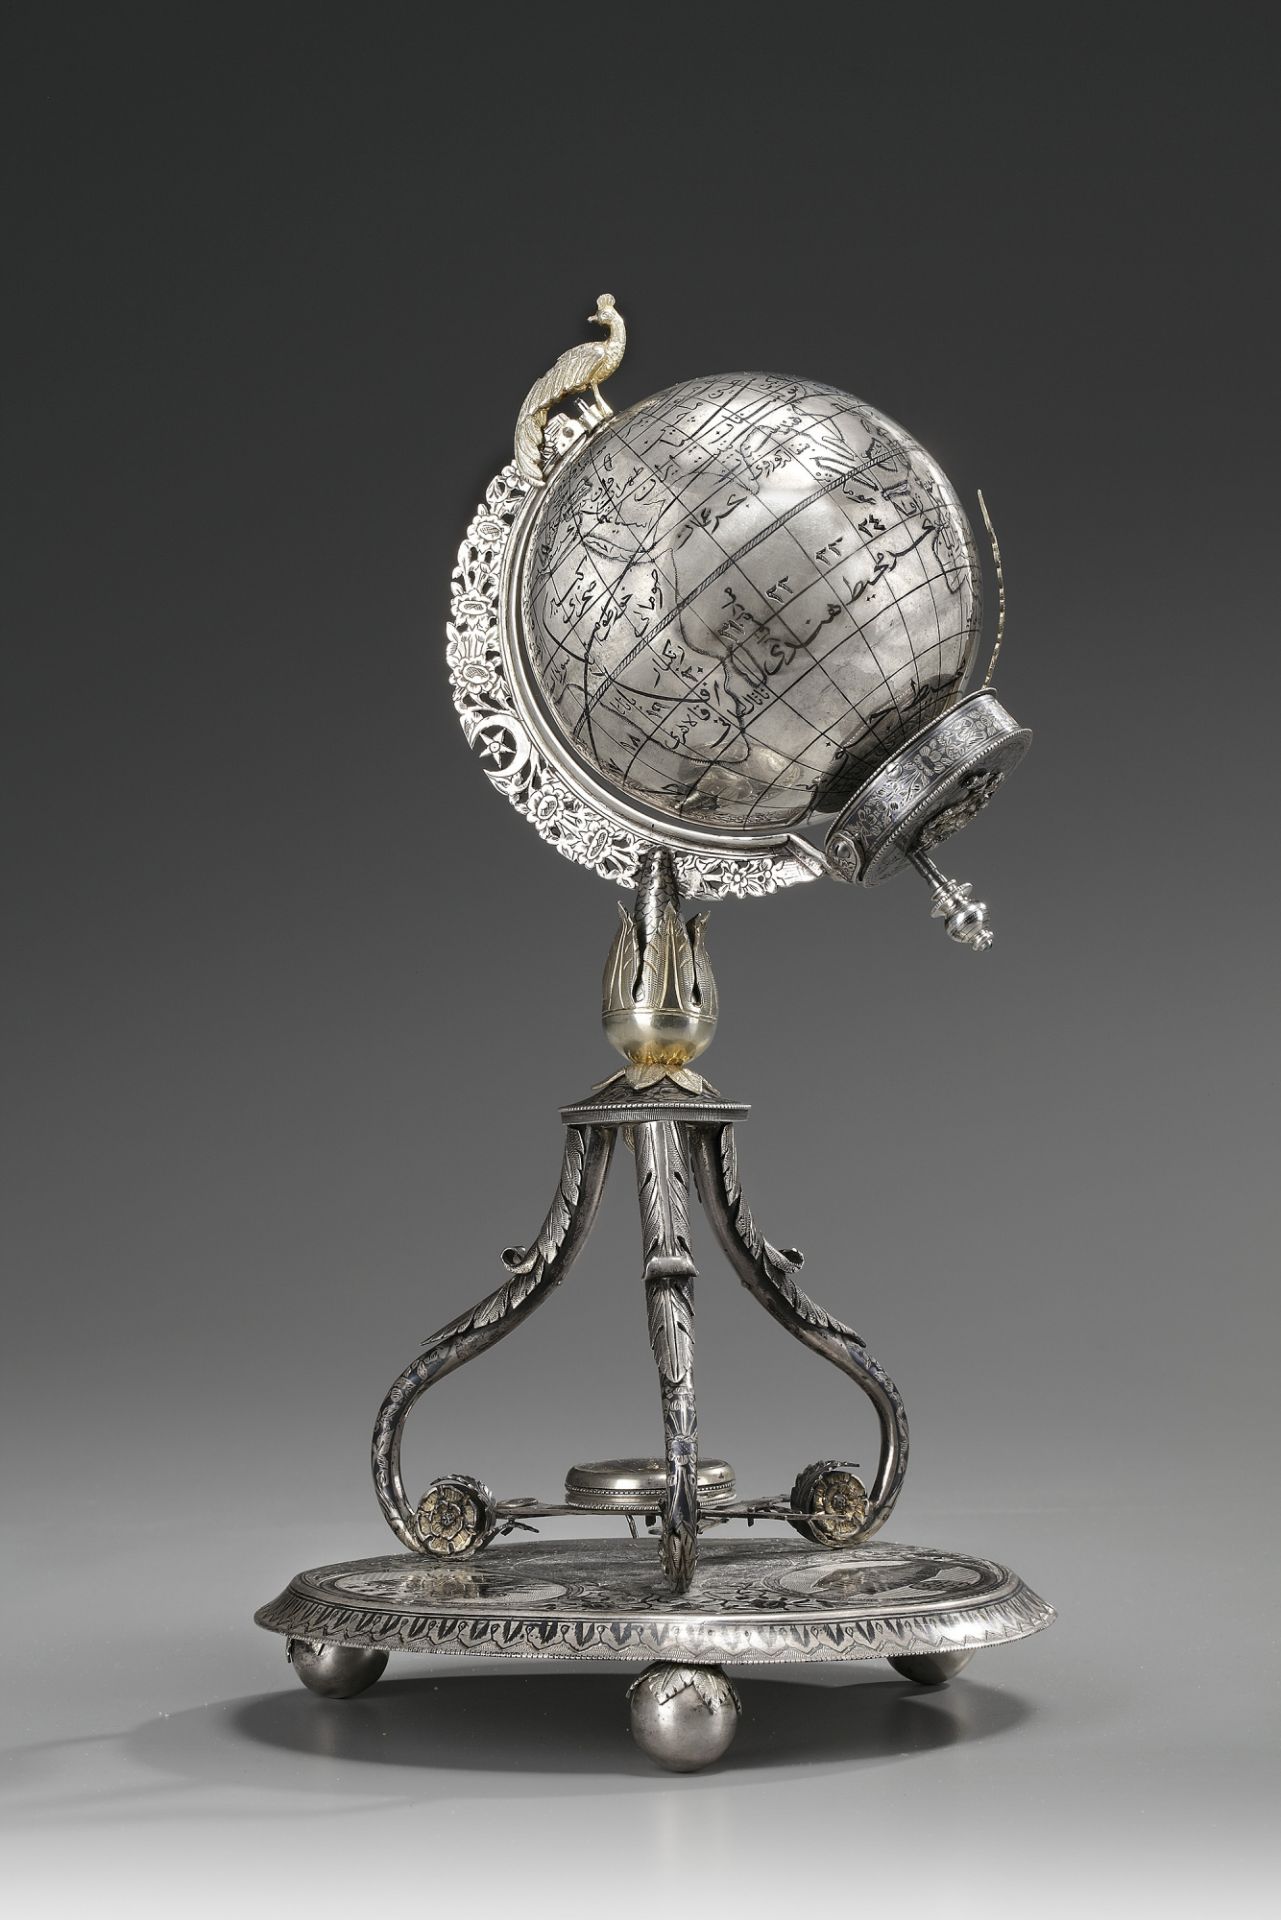 AN OTTOMAN SILVER, NIELLOED AND ENGRAVED GLOBE CLOCK BEARING THE TUGHRA OF SULTAN ABDULHAMID II TURK - Image 3 of 9